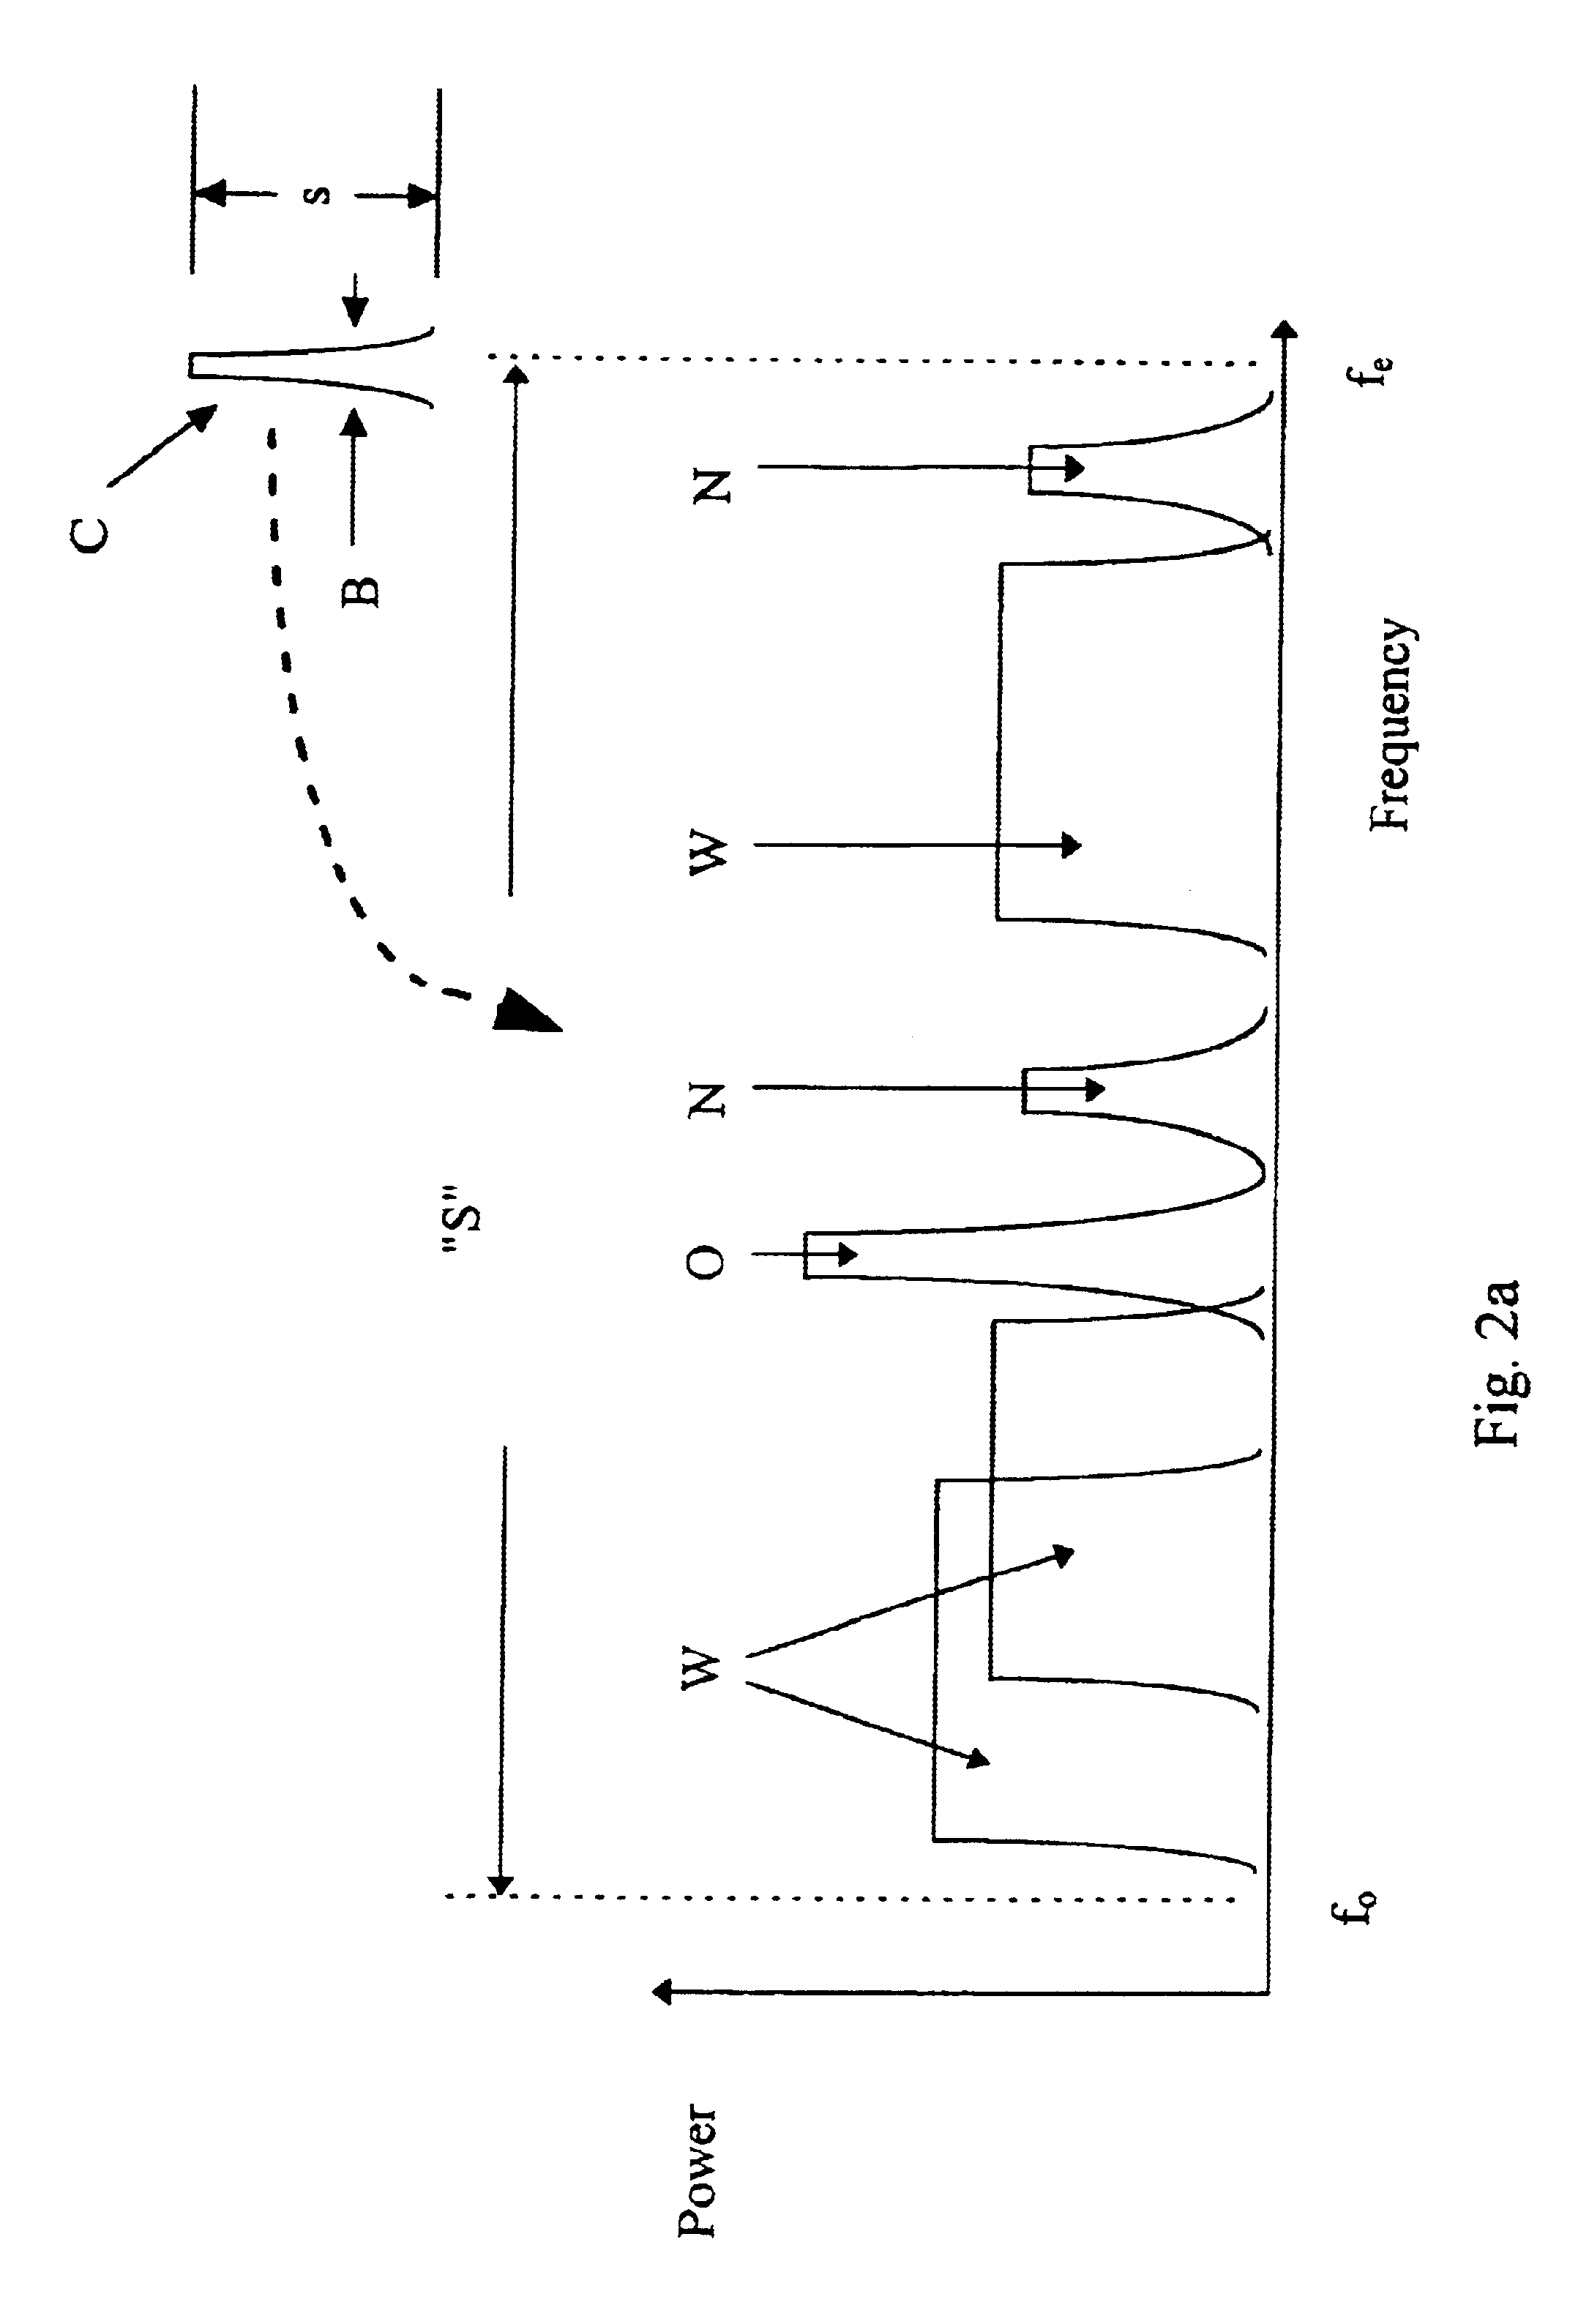 Method and apparatus for allocation of a transmission frequency within a given frequency spectrum